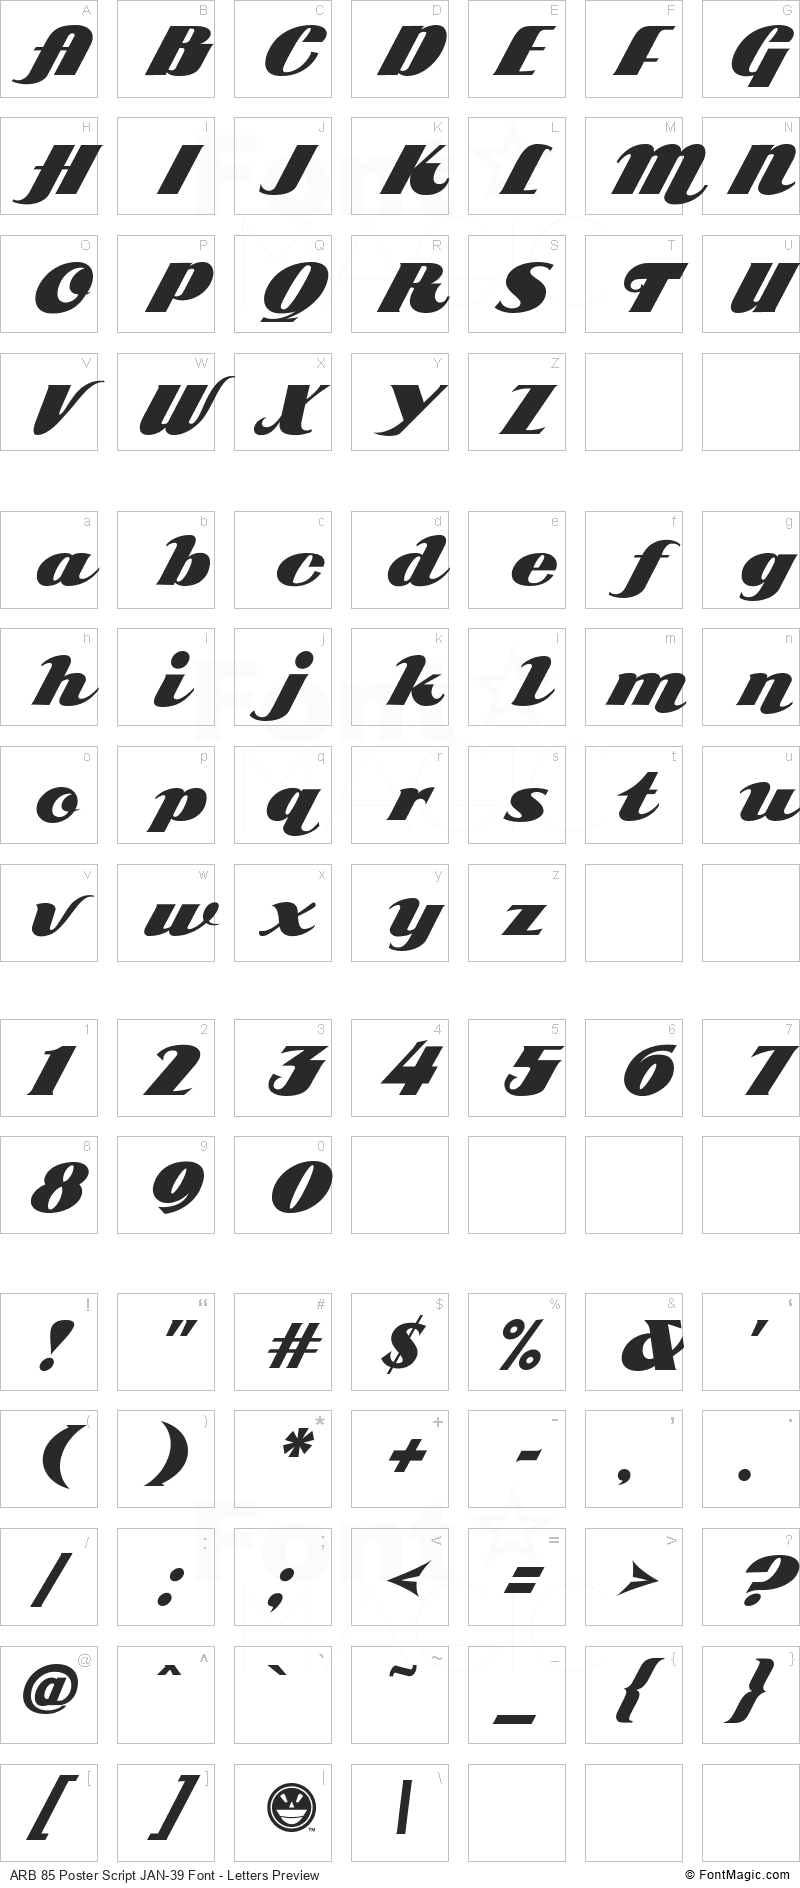 ARB 85 Poster Script JAN-39 Font - All Latters Preview Chart